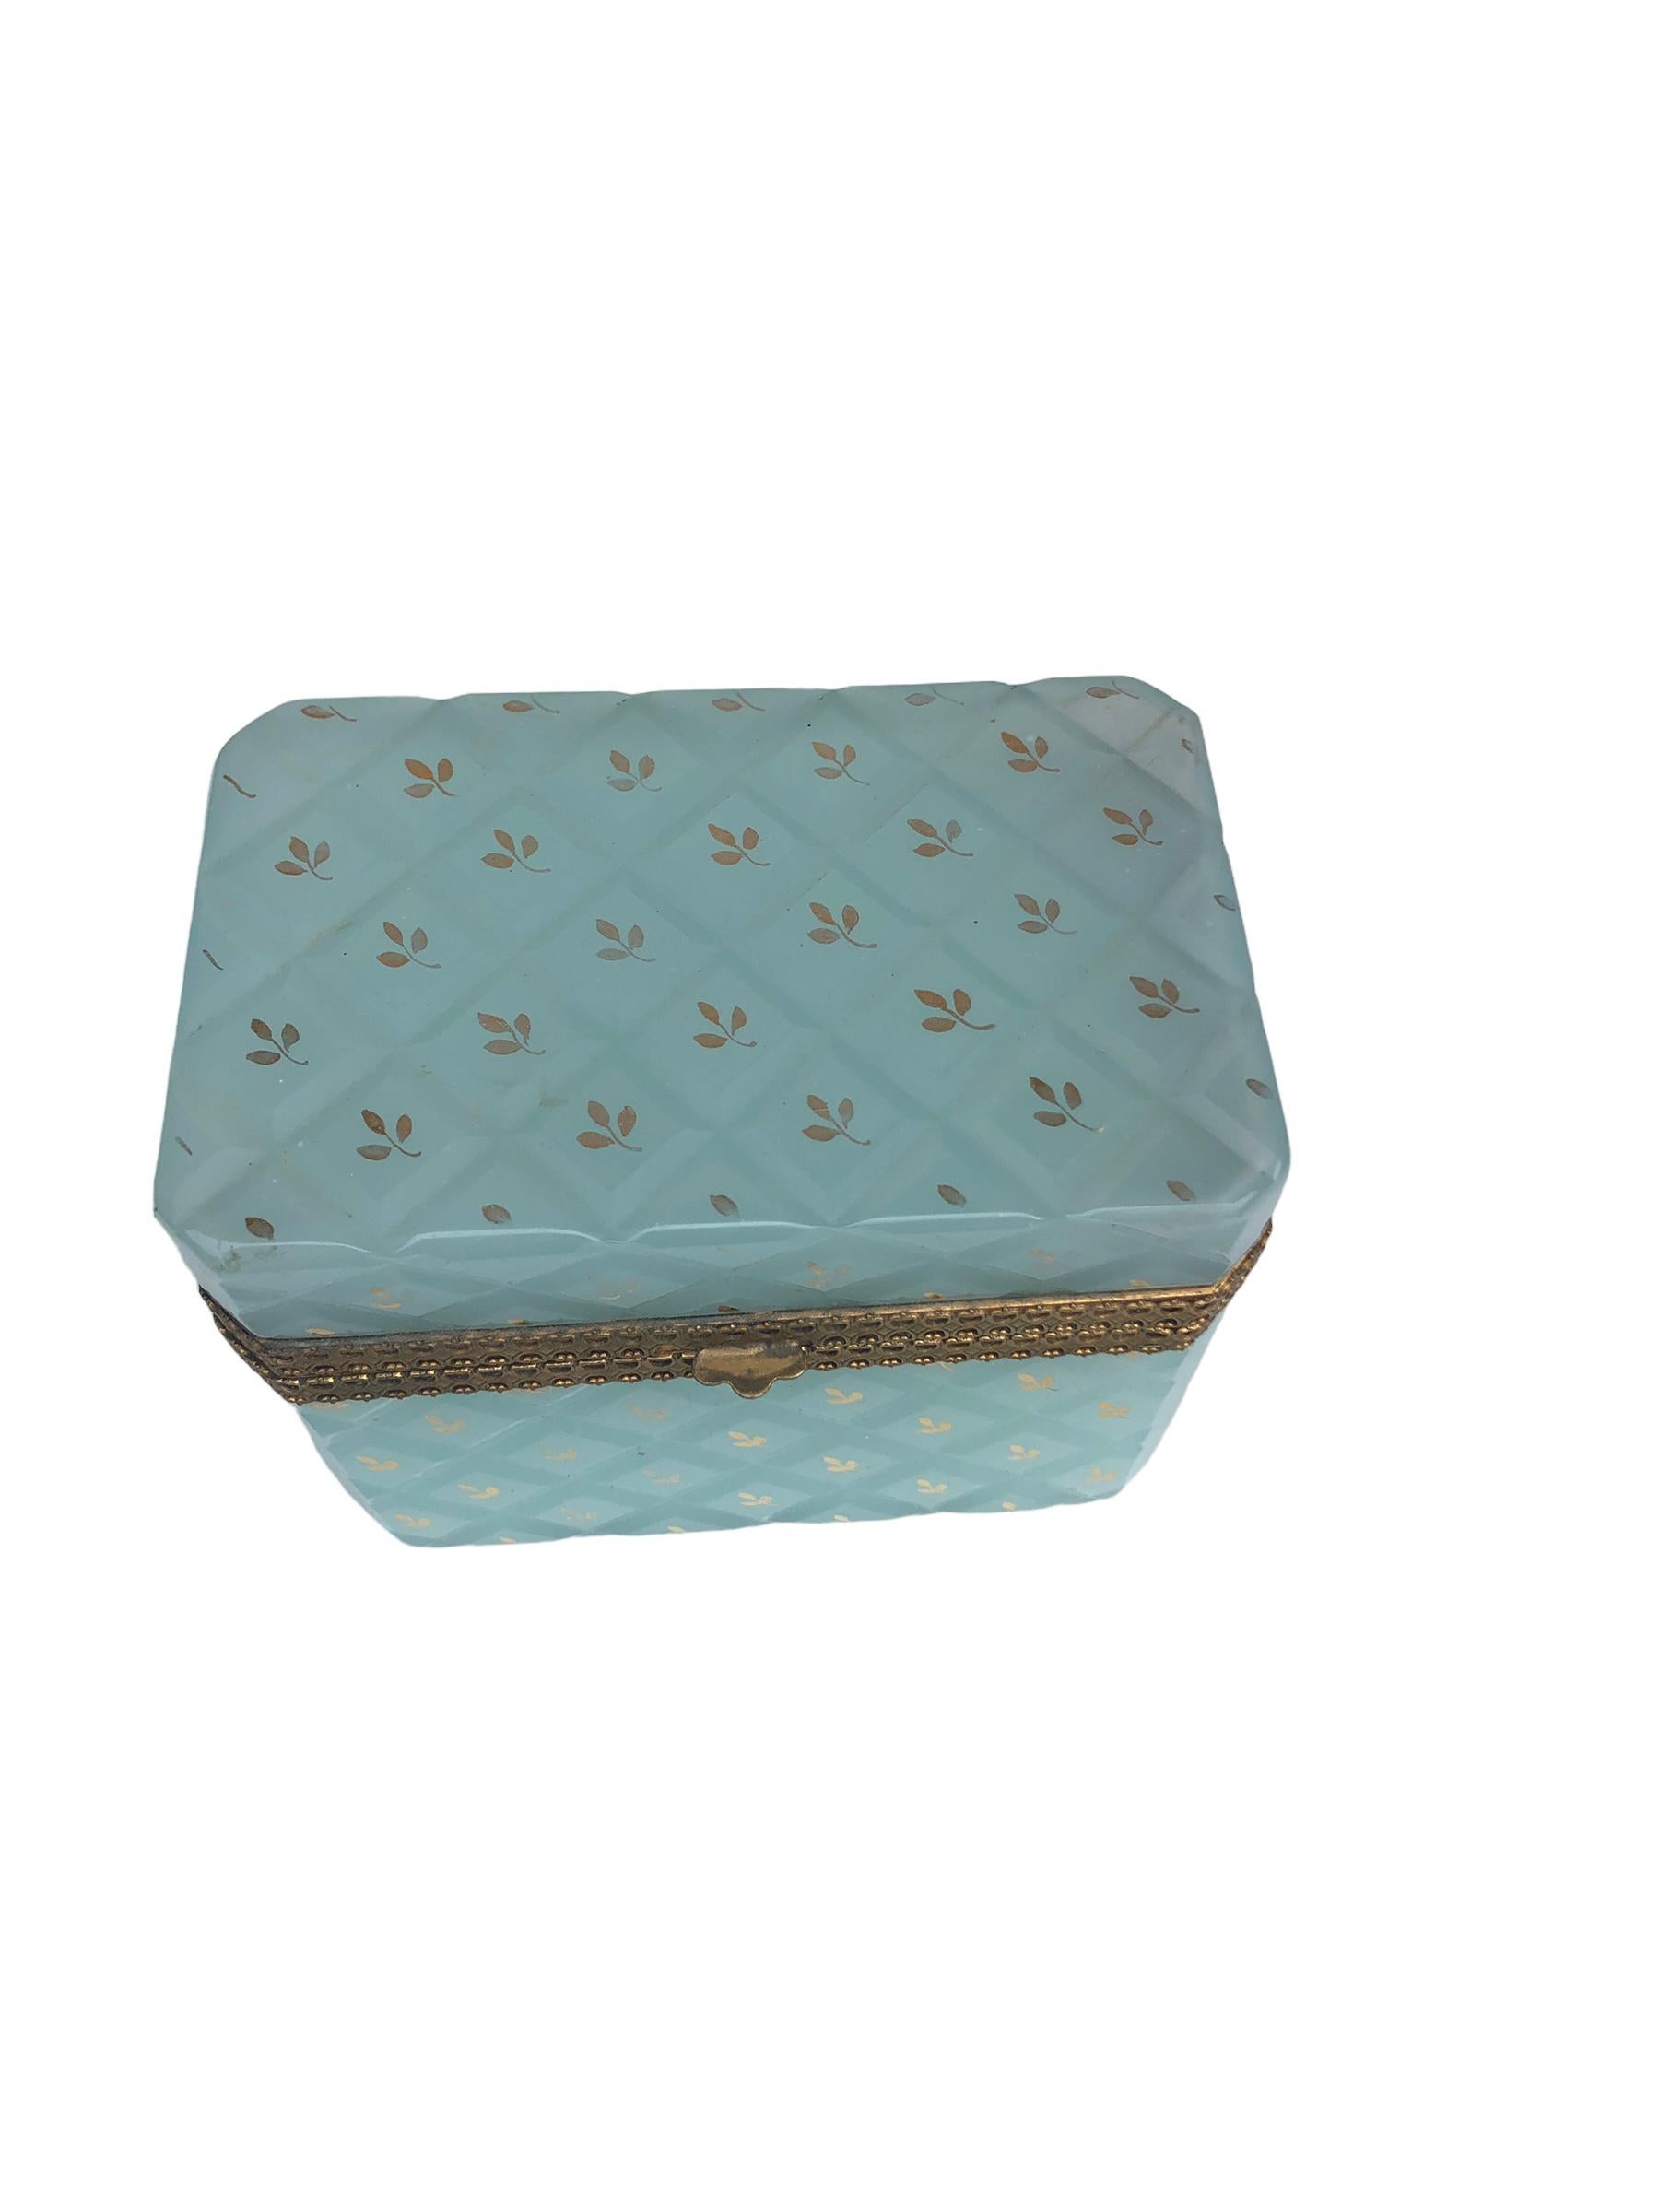 French Art Deco Blue Opaline Box. A beautiful box in a lovely robins blue egg color with a diamond shaped cut pattern and gilt leaf design. 